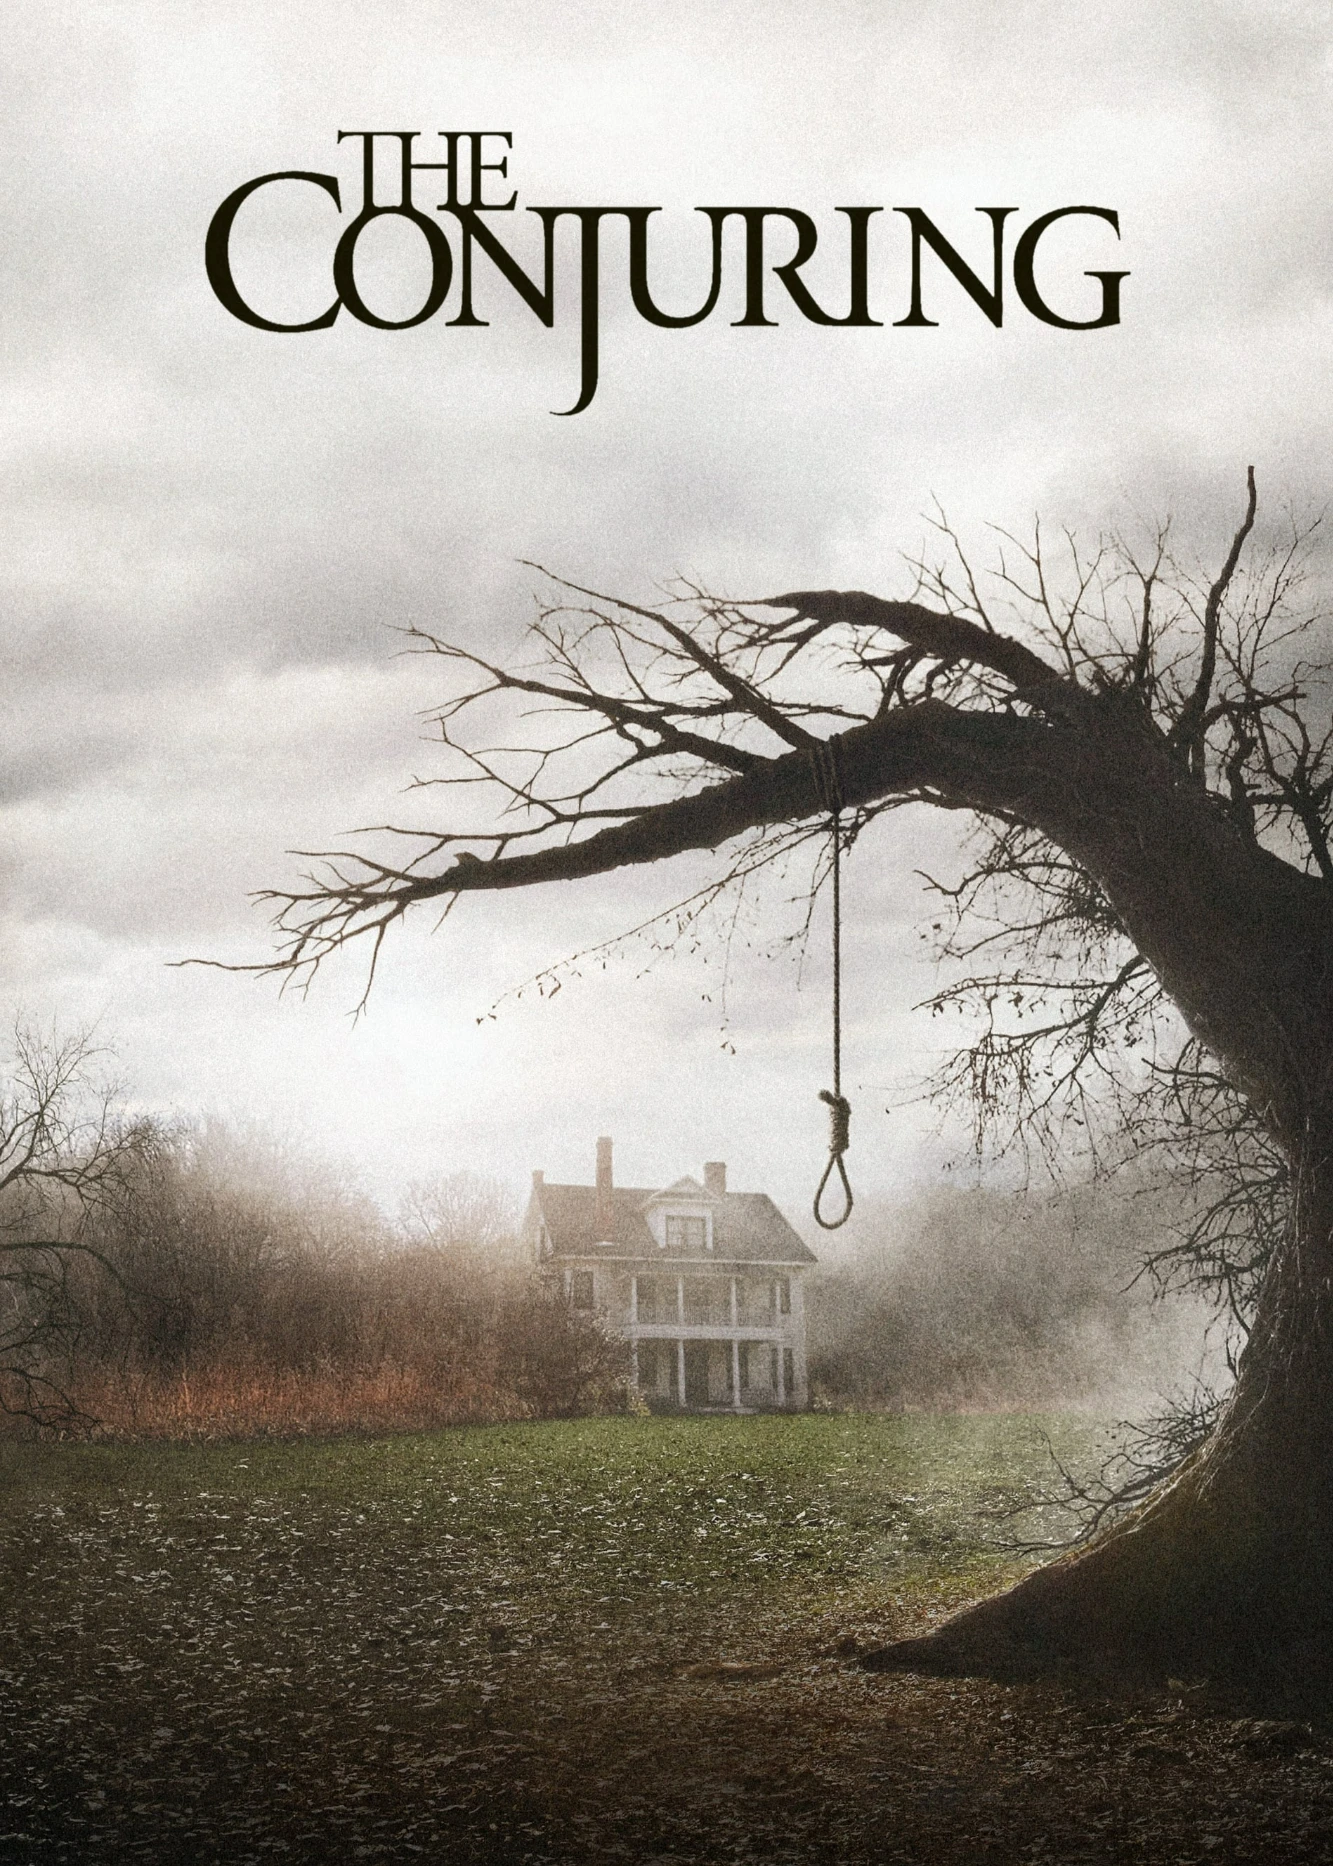 The Conjuring | The Conjuring (2013)